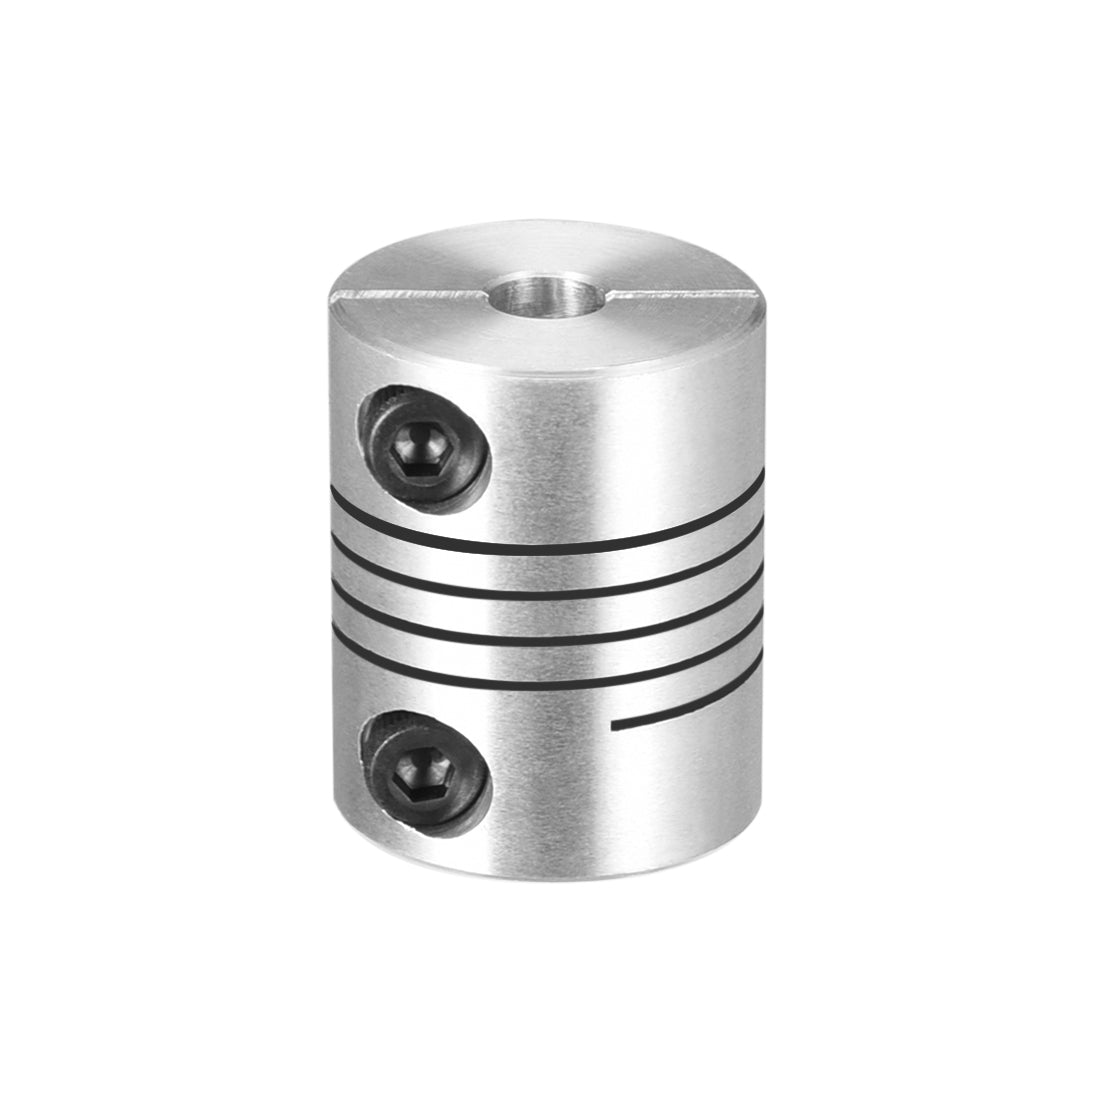 uxcell Uxcell Motor Shaft 5mm to 5mm Helical Beam Coupler Coupling 20mm Dia 25mm Length